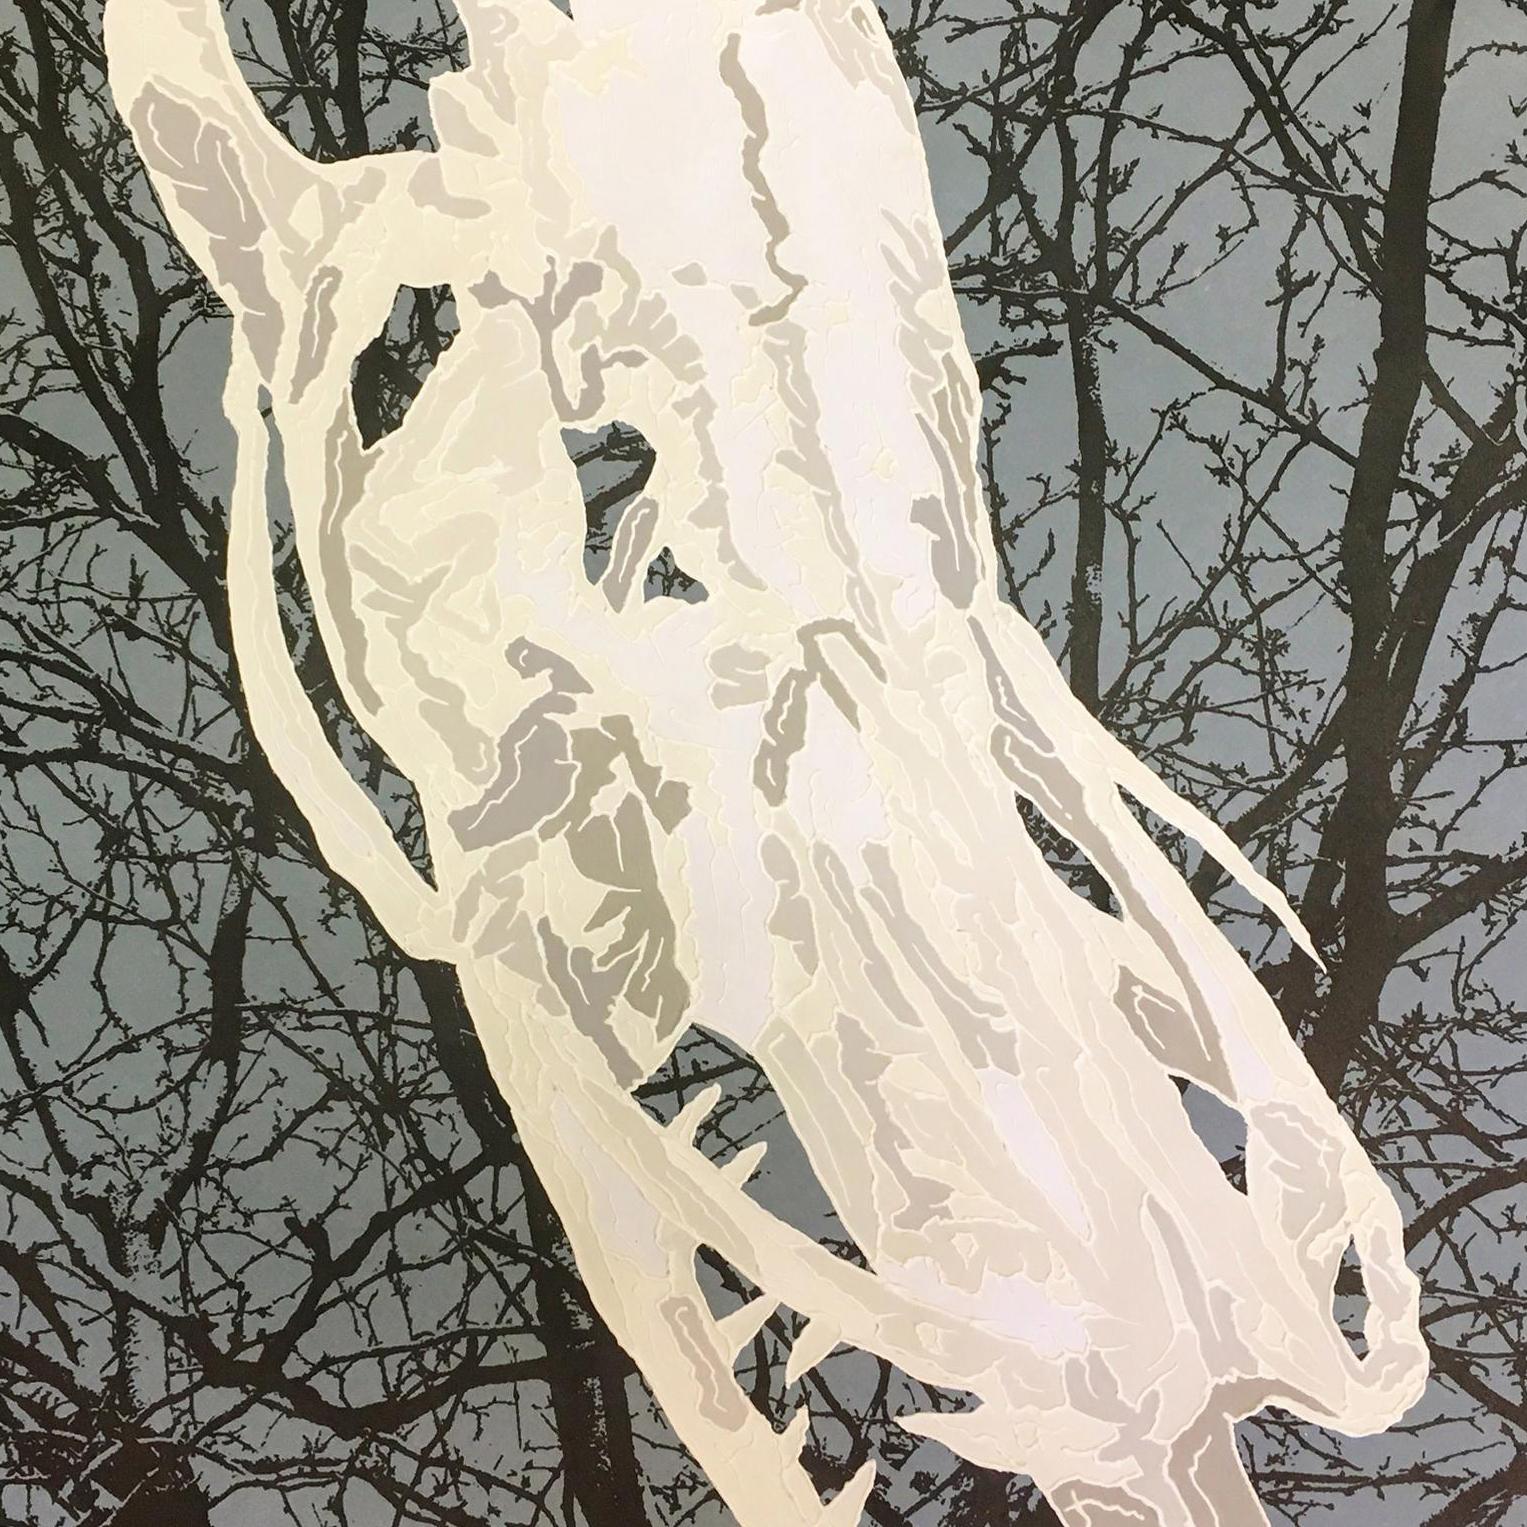 J Ivcevich, Trail Natural History (Blue Grey Gator), mixed media on paper, 2018 - Abstract Mixed Media Art by J. Ivcevich